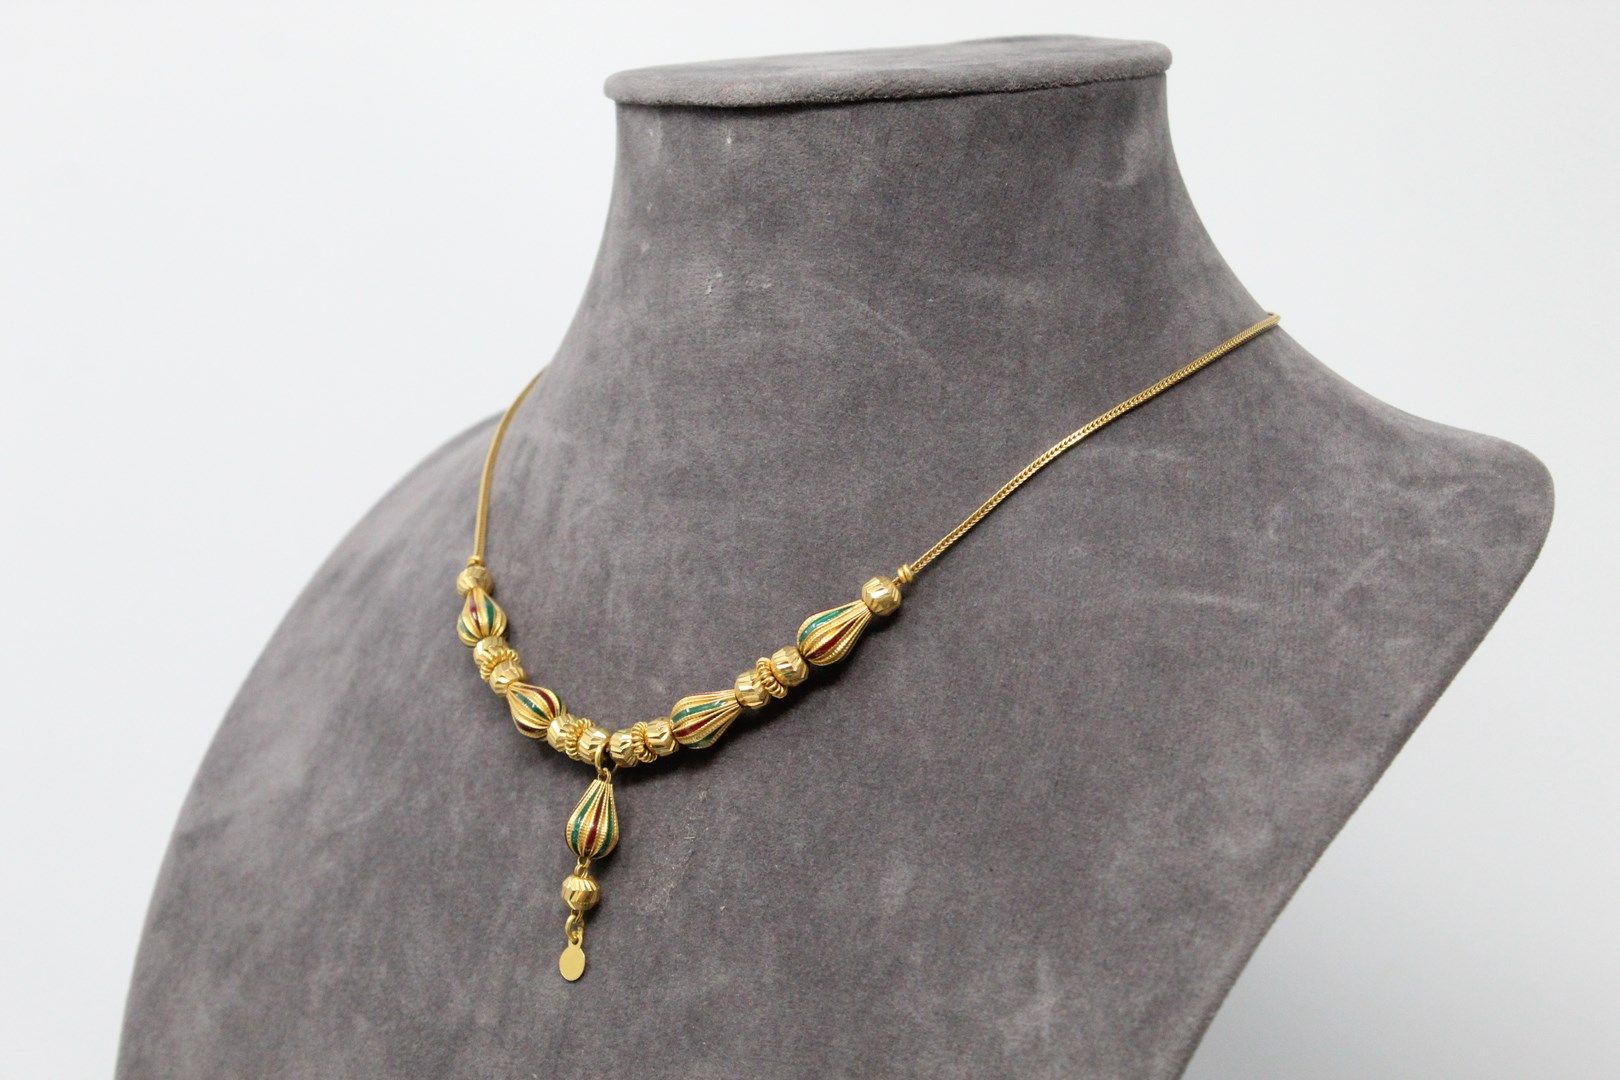 Null 18K (750) yellow gold necklace with alternating faceted and pear-shaped ele&hellip;